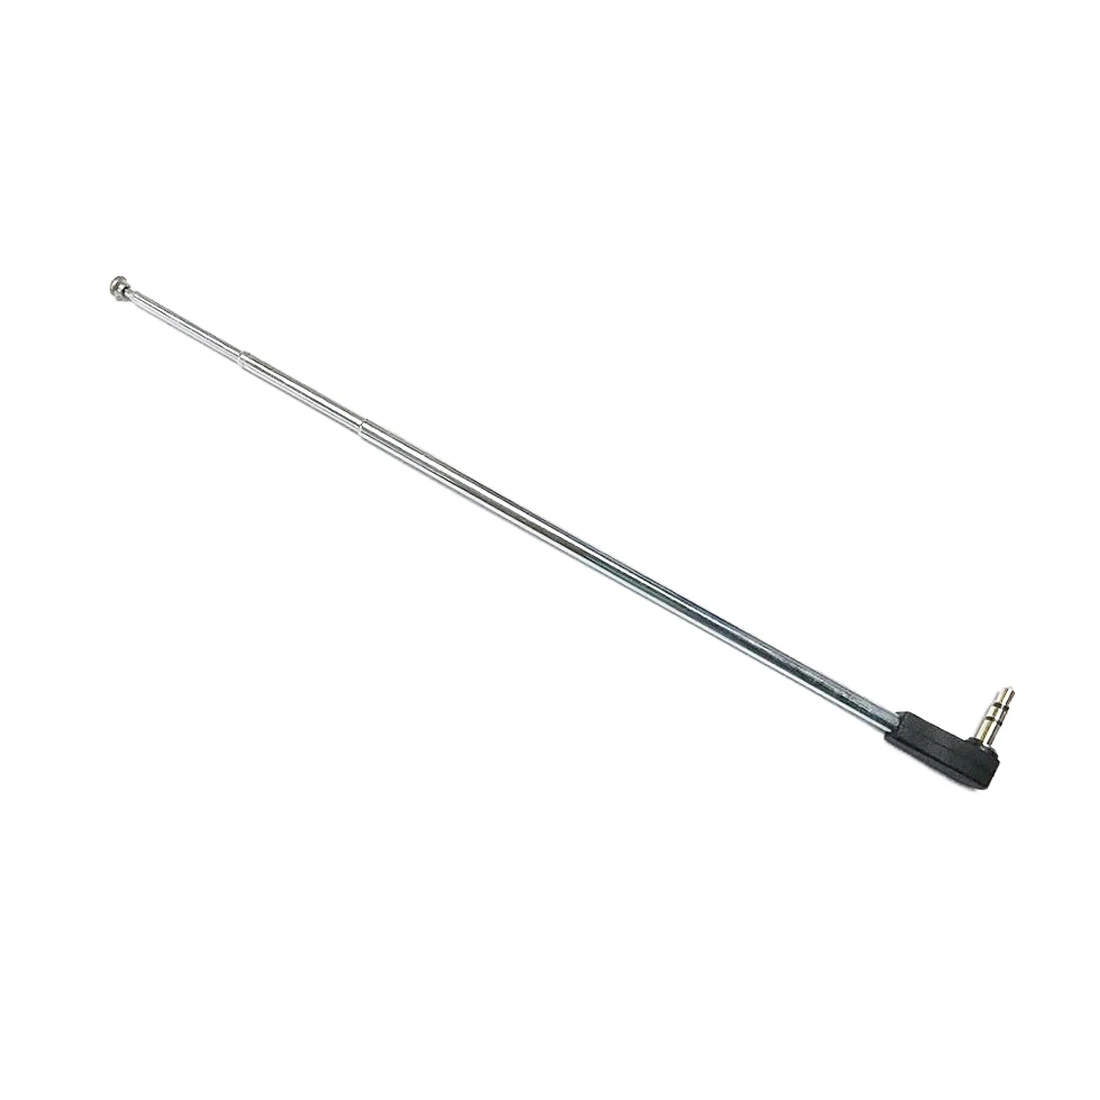 1pc 158mm 3 Section Telescoping Antenna 3.5mm Male FM Radio Aerial for Mobile Cell Phone Wholesale Price